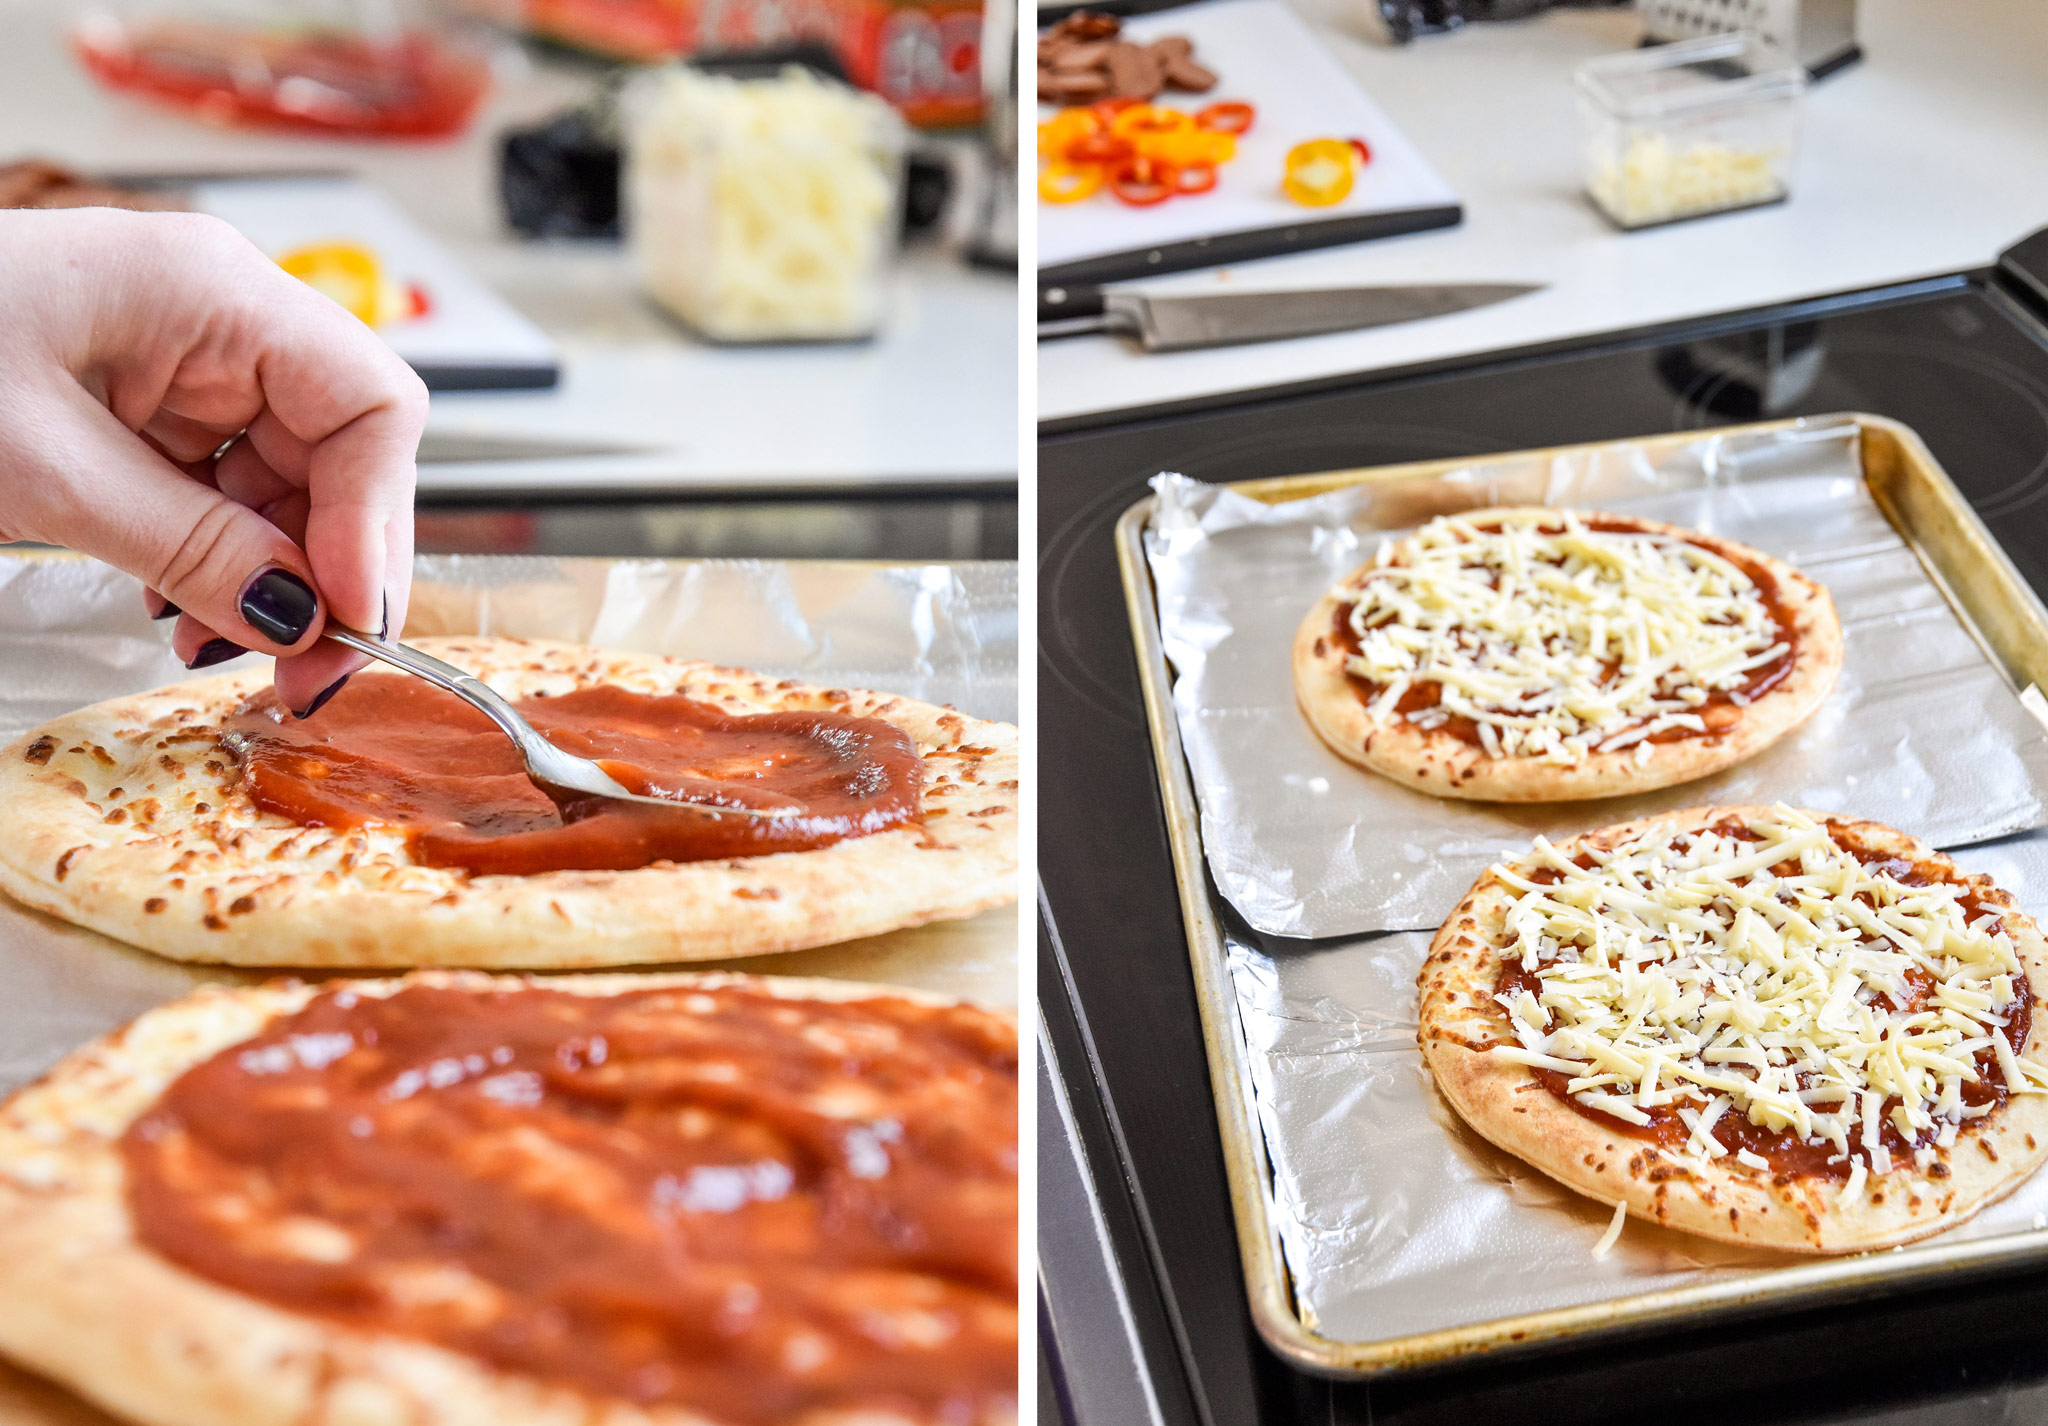 assembling the personal pizzas with sauce and cheese